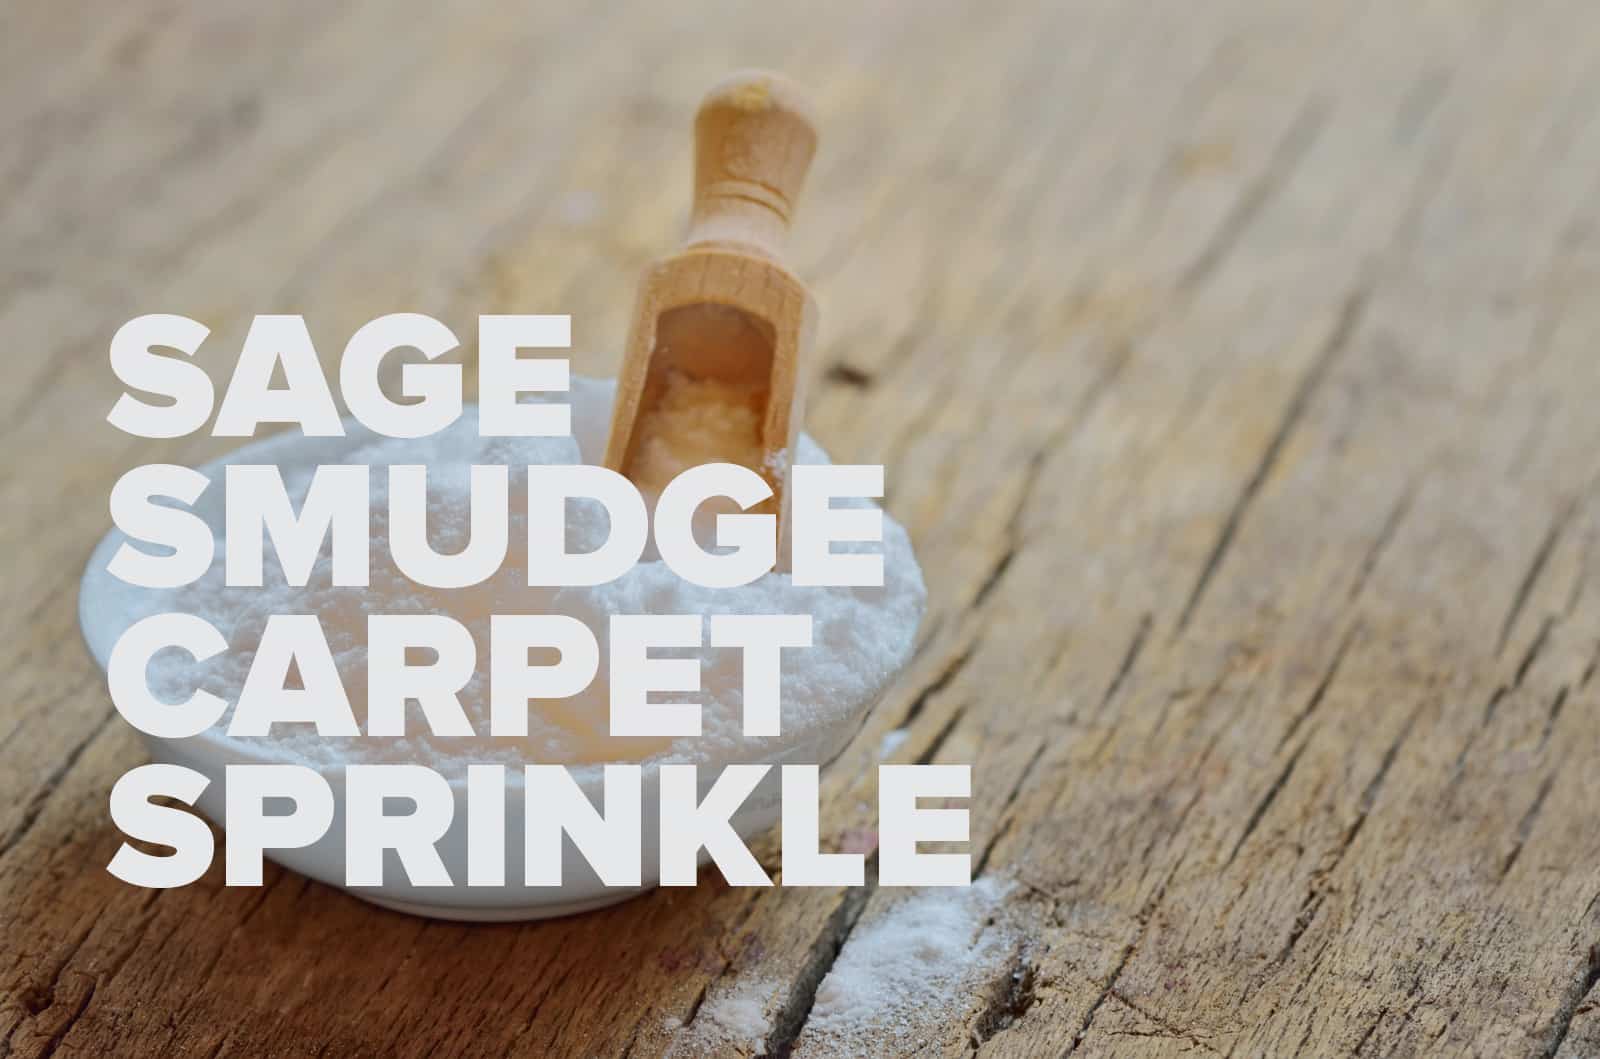 A wooden scoop with white powder sprinkled on a natural wooden surface, with the words "occult sage smudge carpet sprinkle" floating above, suggesting a natural deodorizing or cleansing product for carpets